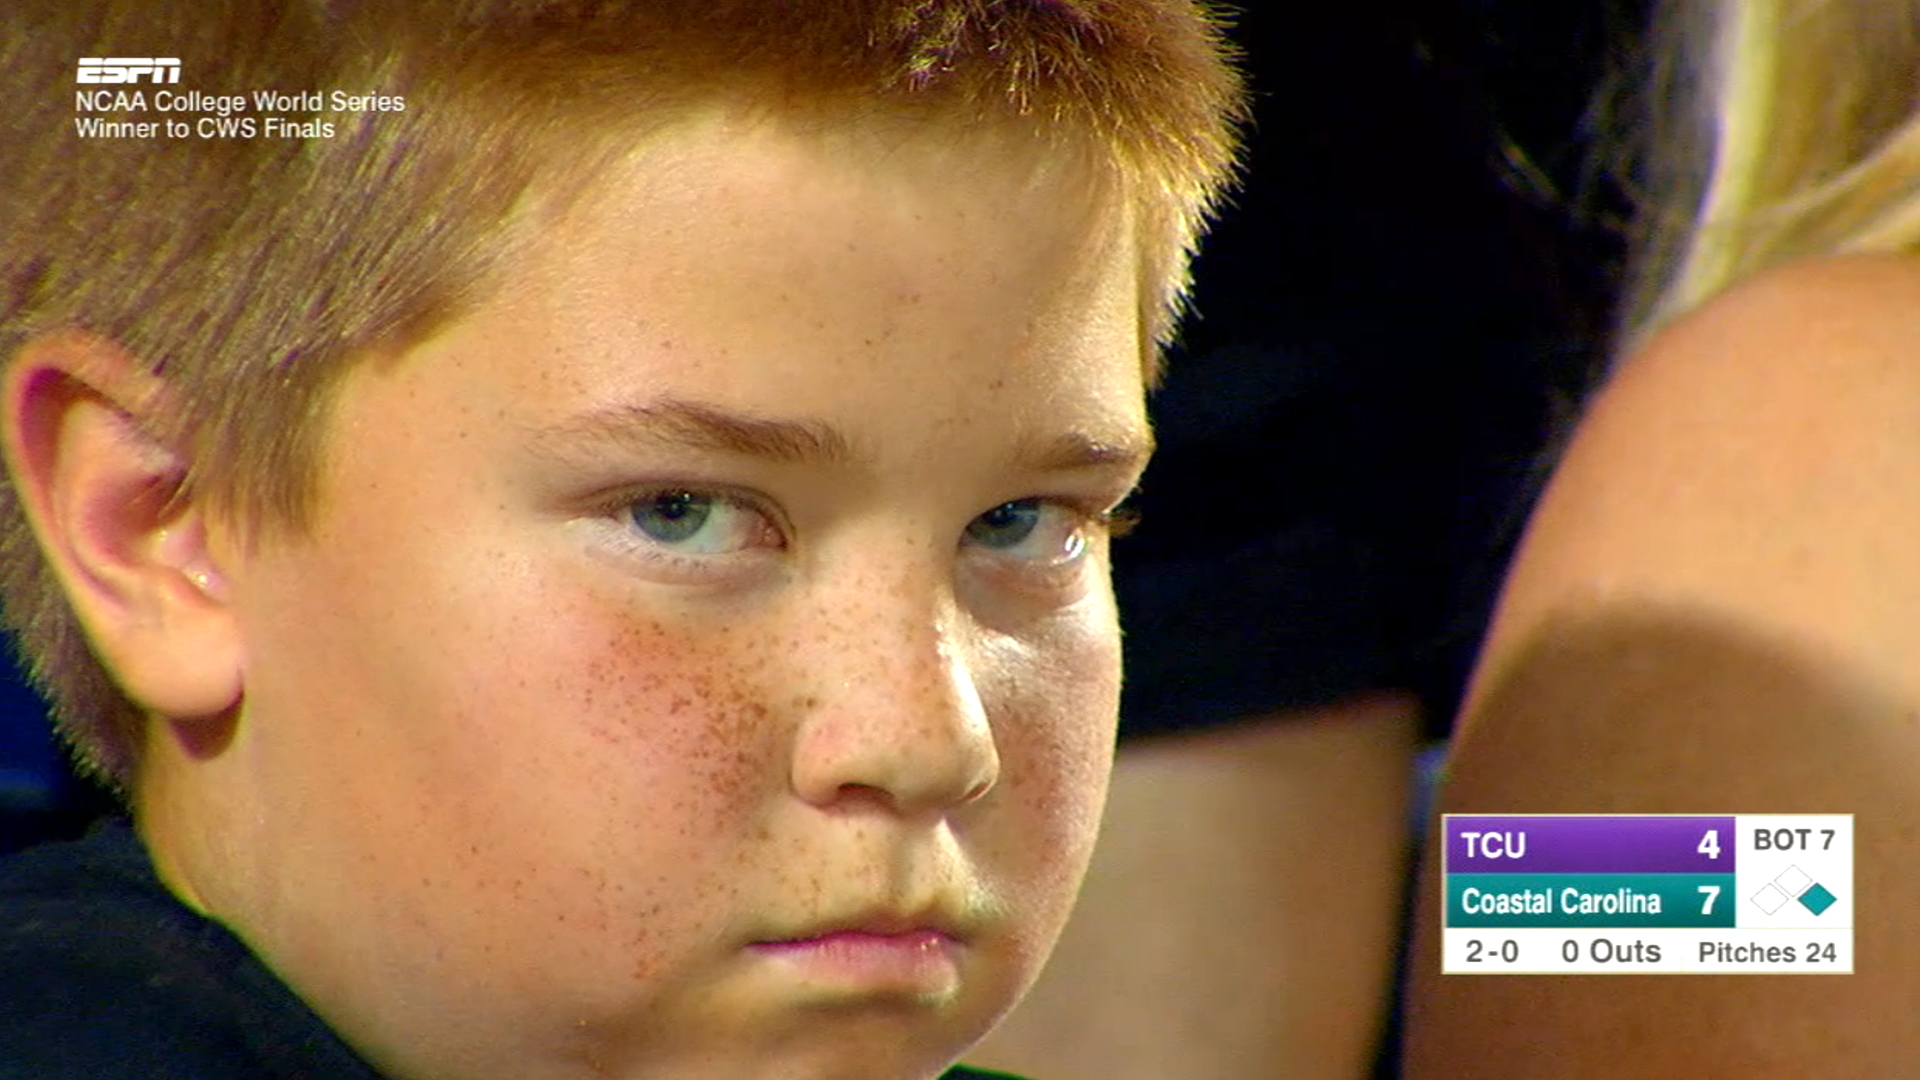 Kid's epic death stare steals the show at baseball game